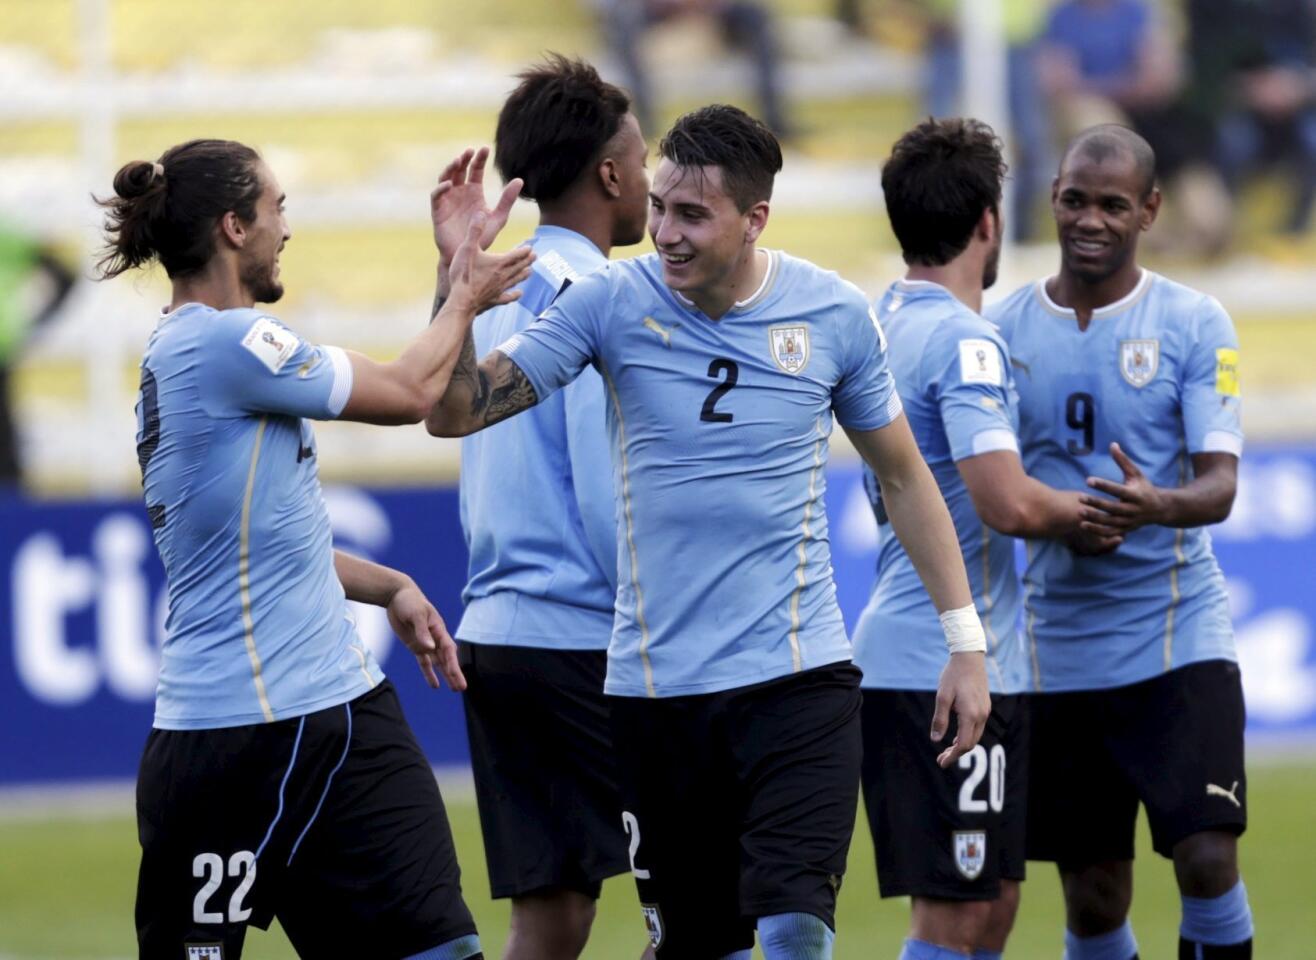 Jose Caceres of Uruguay celebrates with teammates after his victory against Bolivia during their 2018 World Cup qualifying soccer match in La Paz